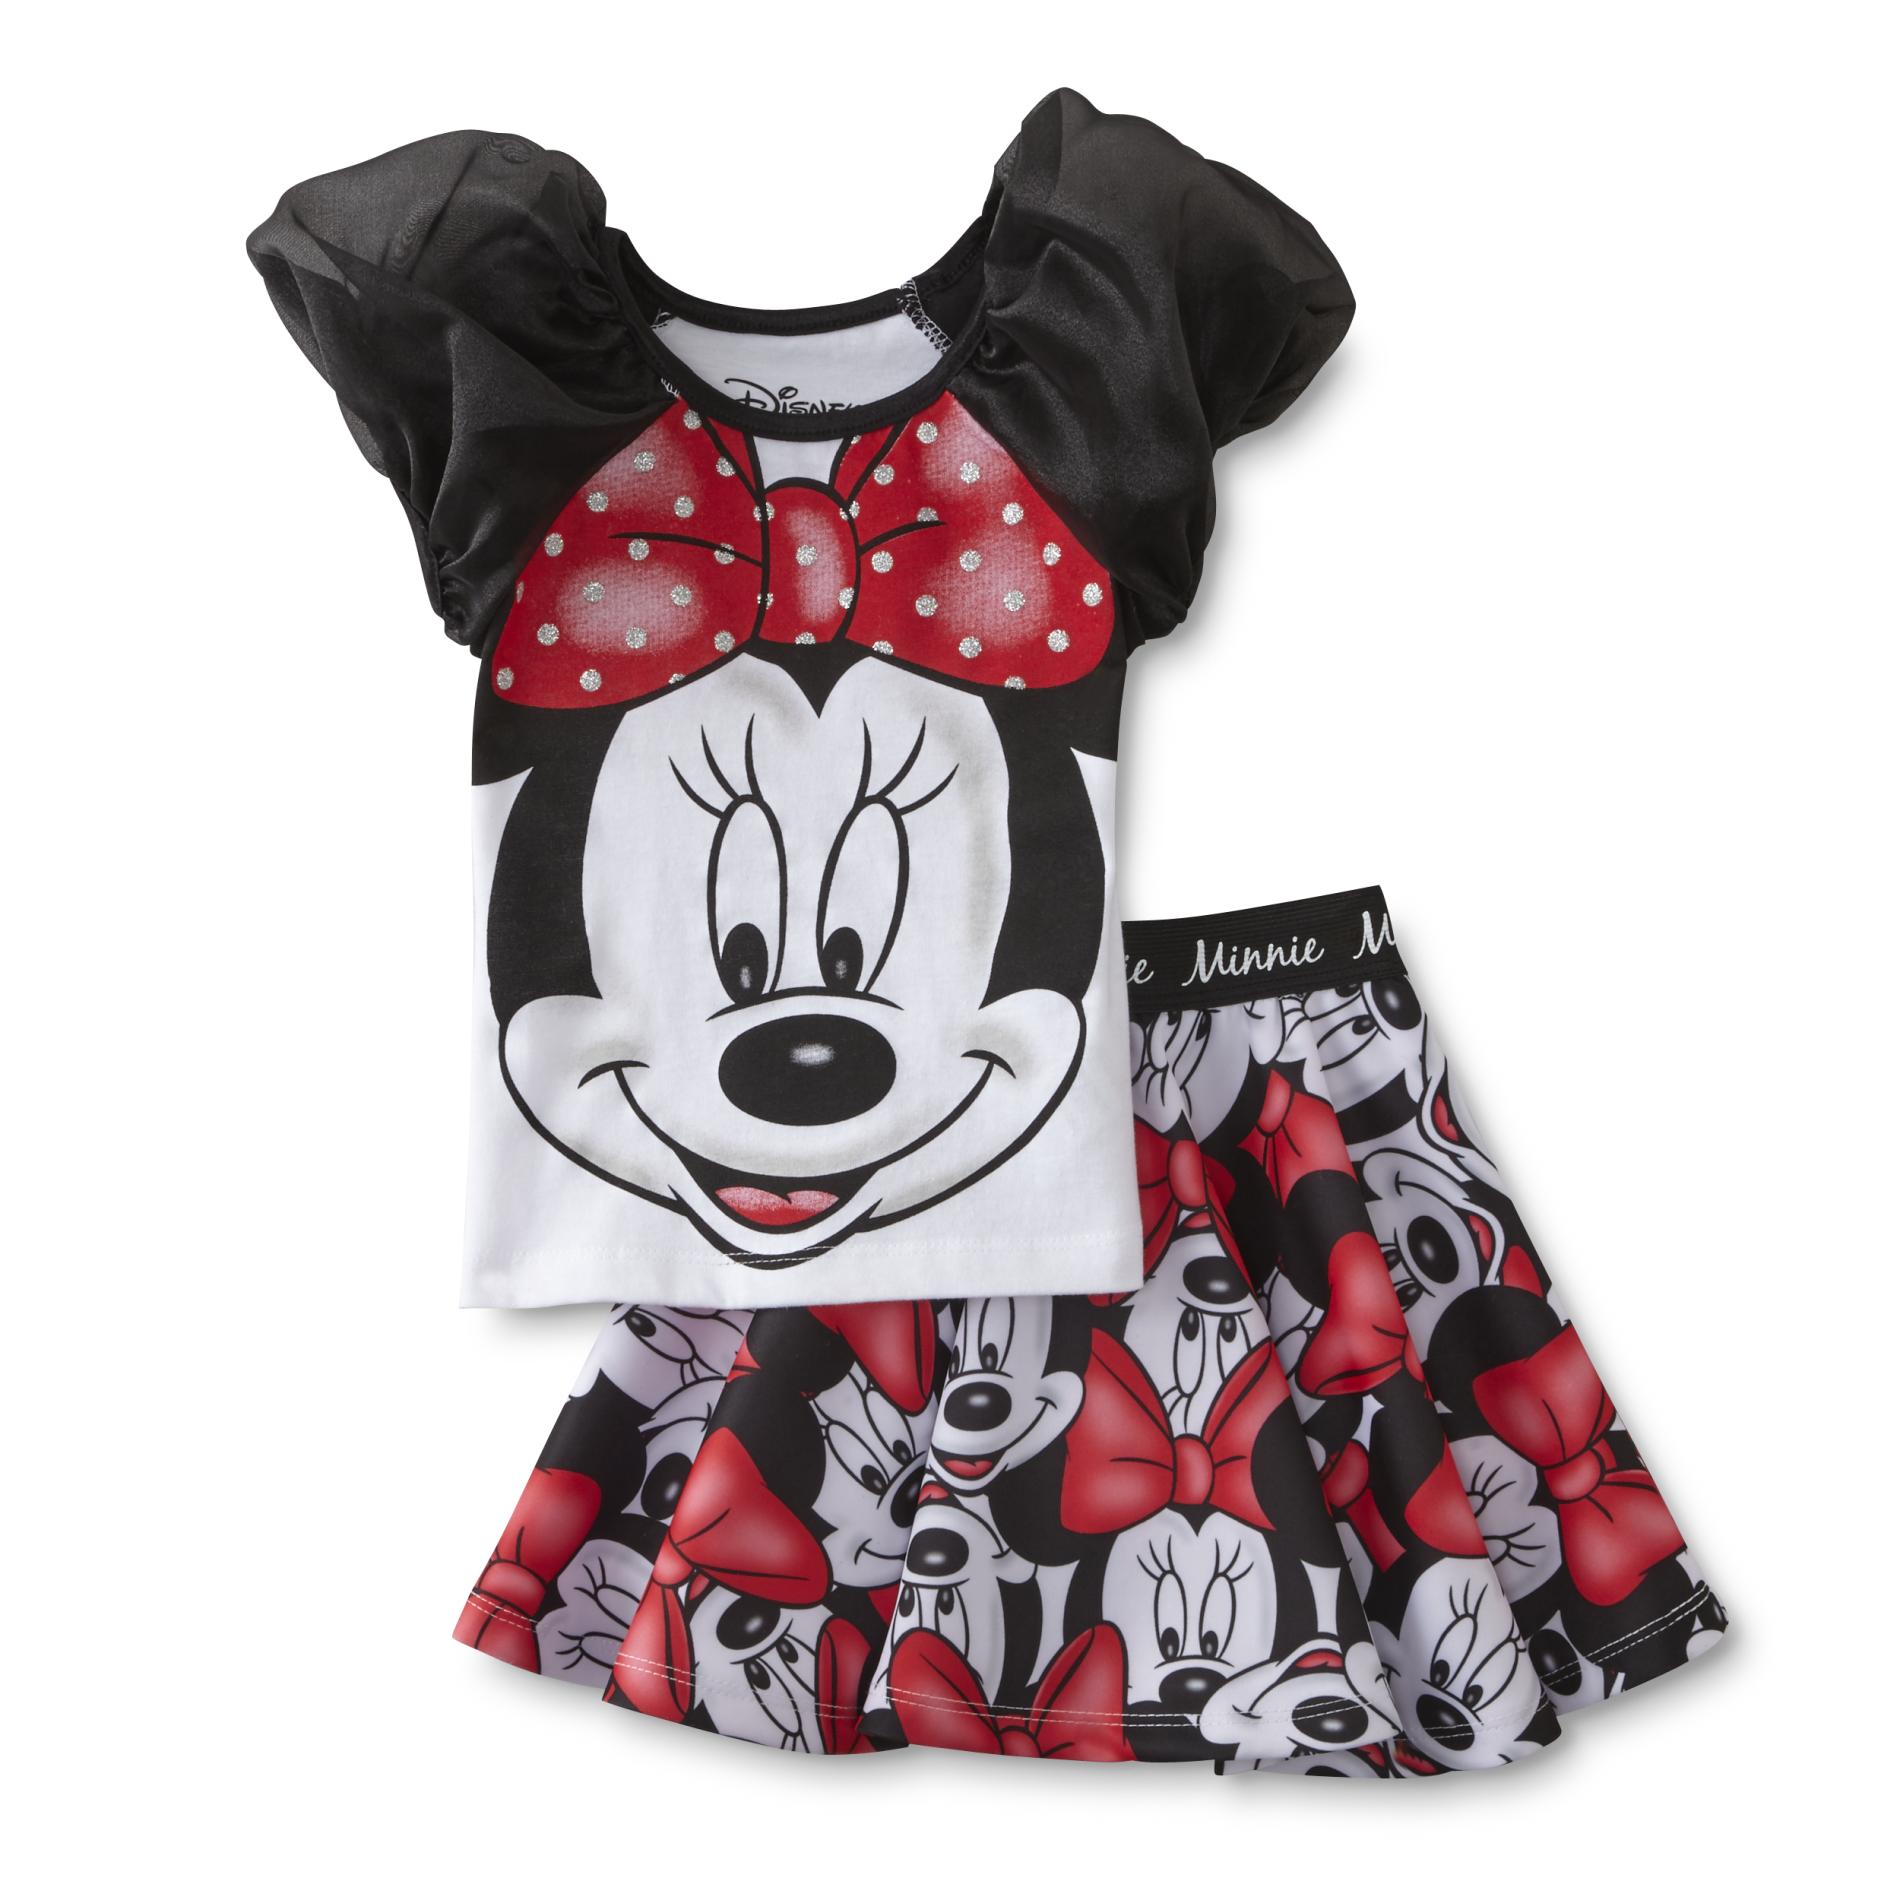 Disney Minnie Mouse Toddler Girl's Top & Skirt | Shop Your Way: Online ...